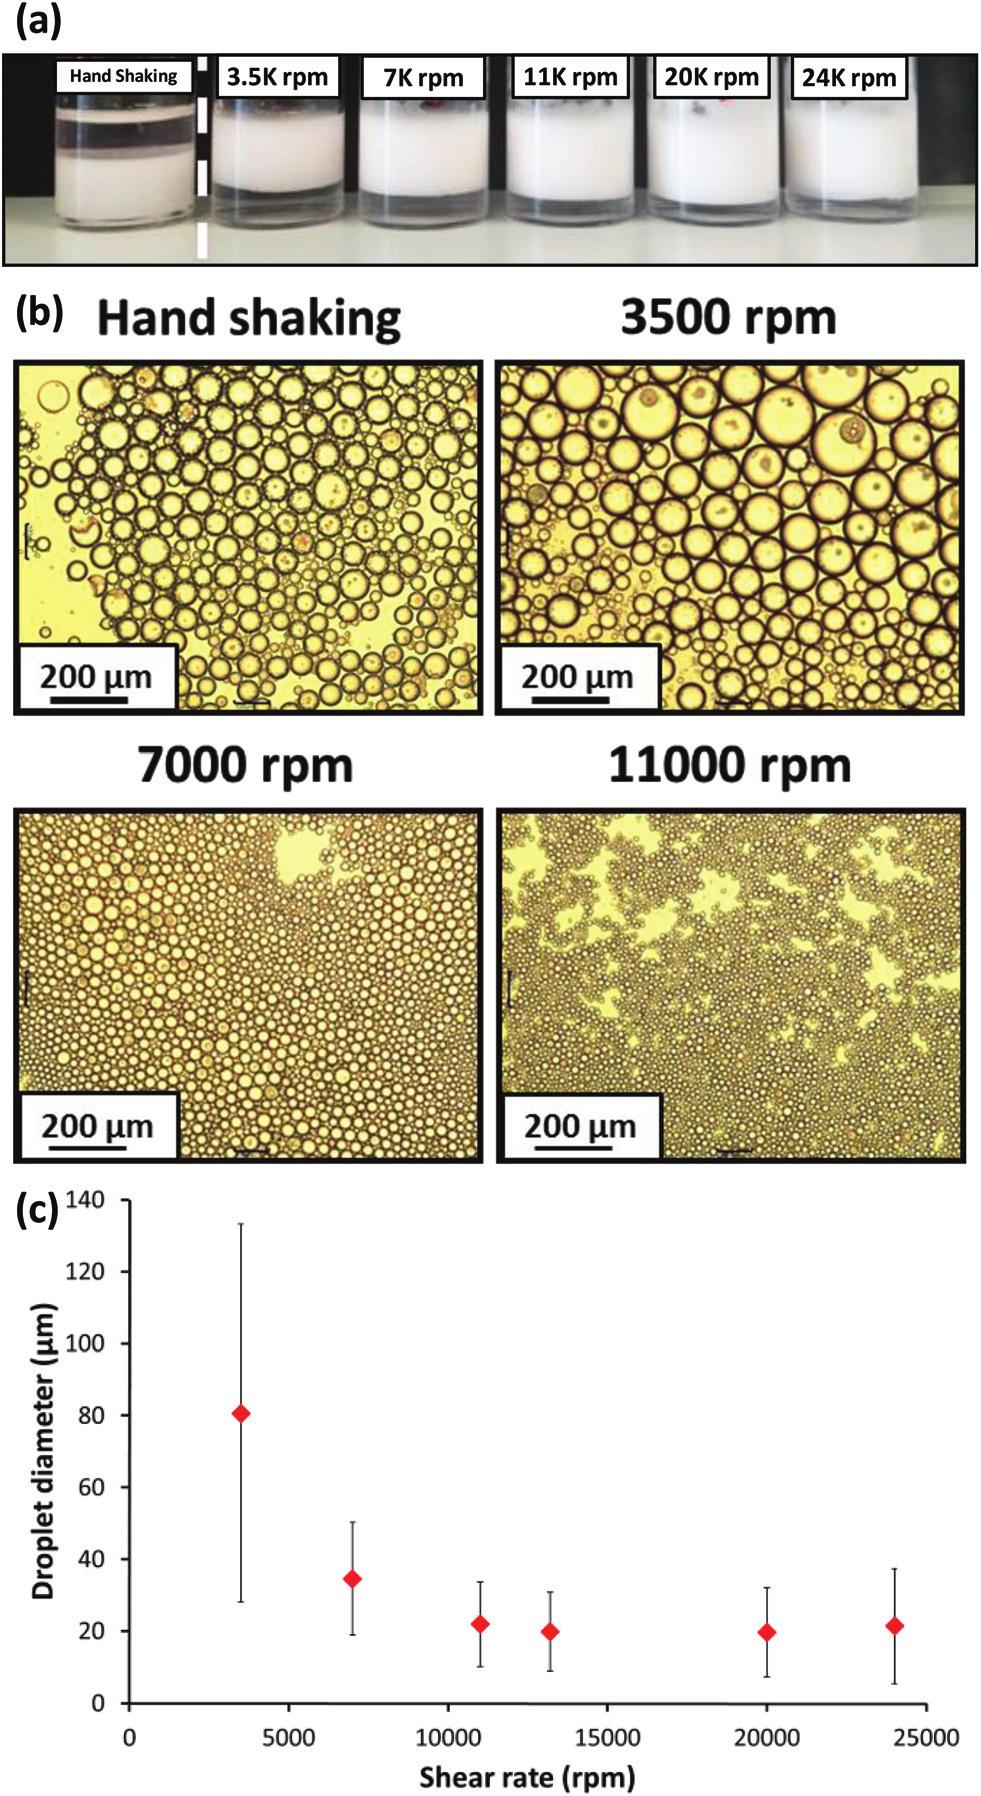 philic PNMEP 49 PSMA 14 spheres, which could then stabilise an oil-in-water Pickering emulsion. Initial studies of the effect of shear rate on emulsion formation were performed using a fixed 1.